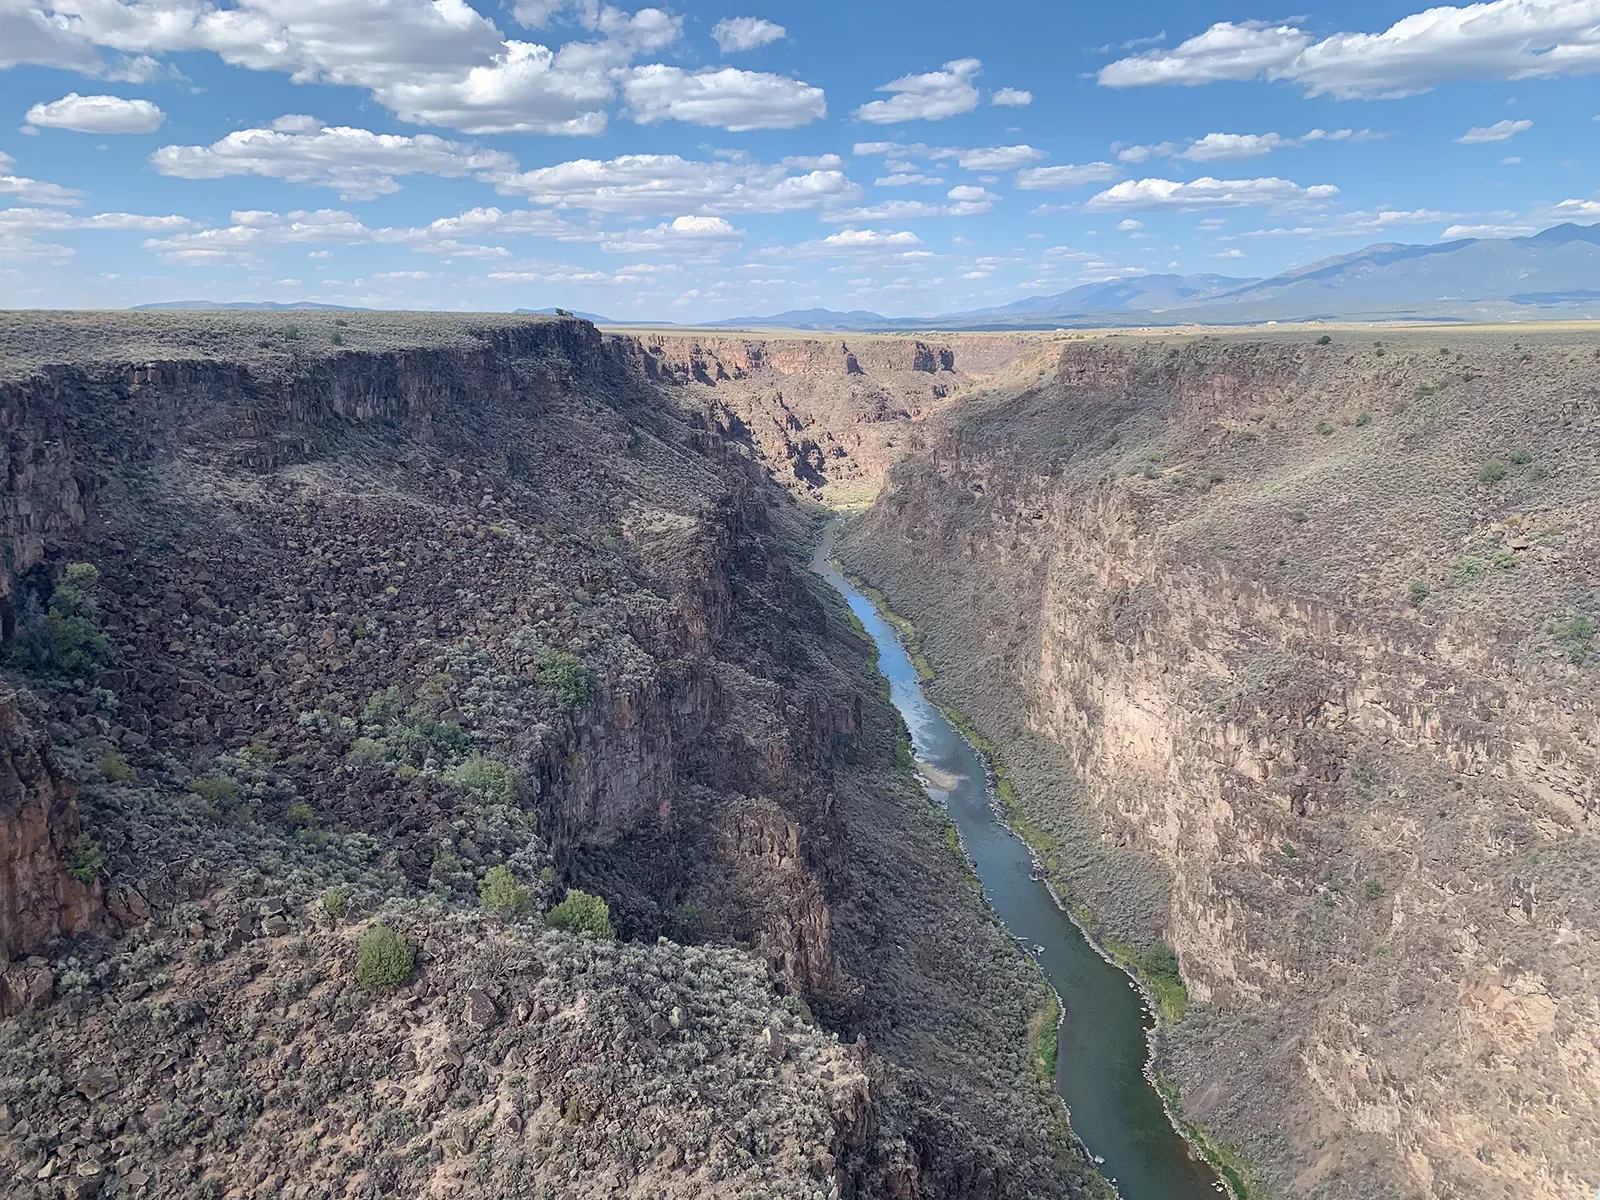 Ariel view of canyon with river